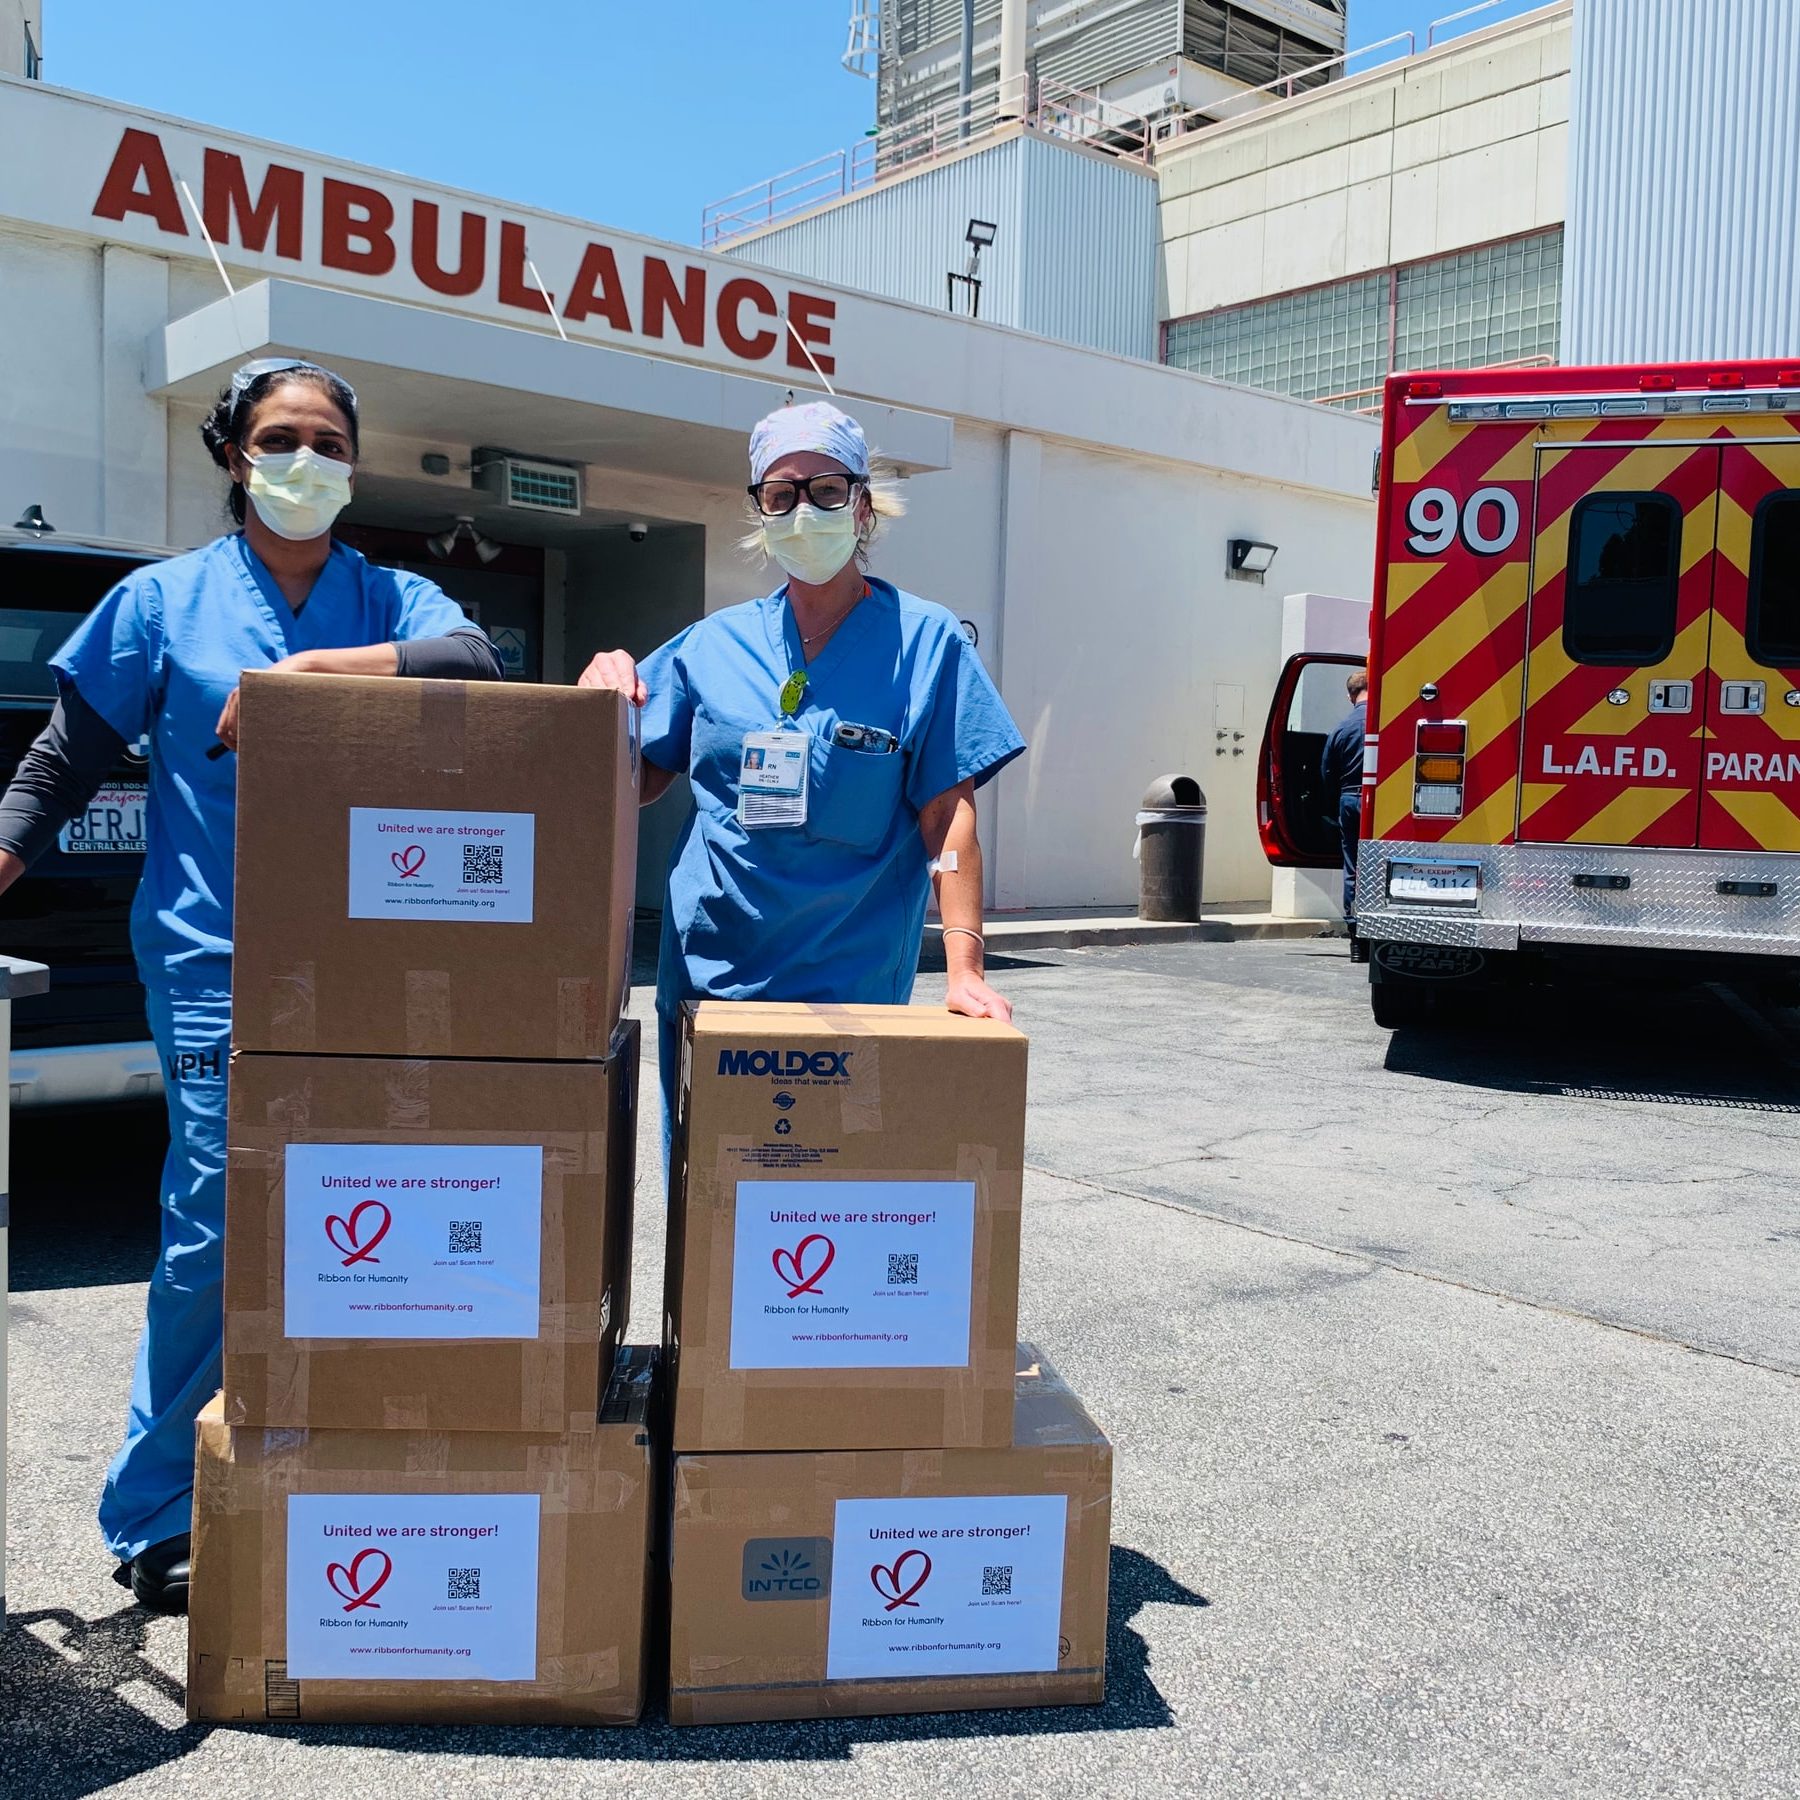 Workers Delivering medical supplies to a hospital 